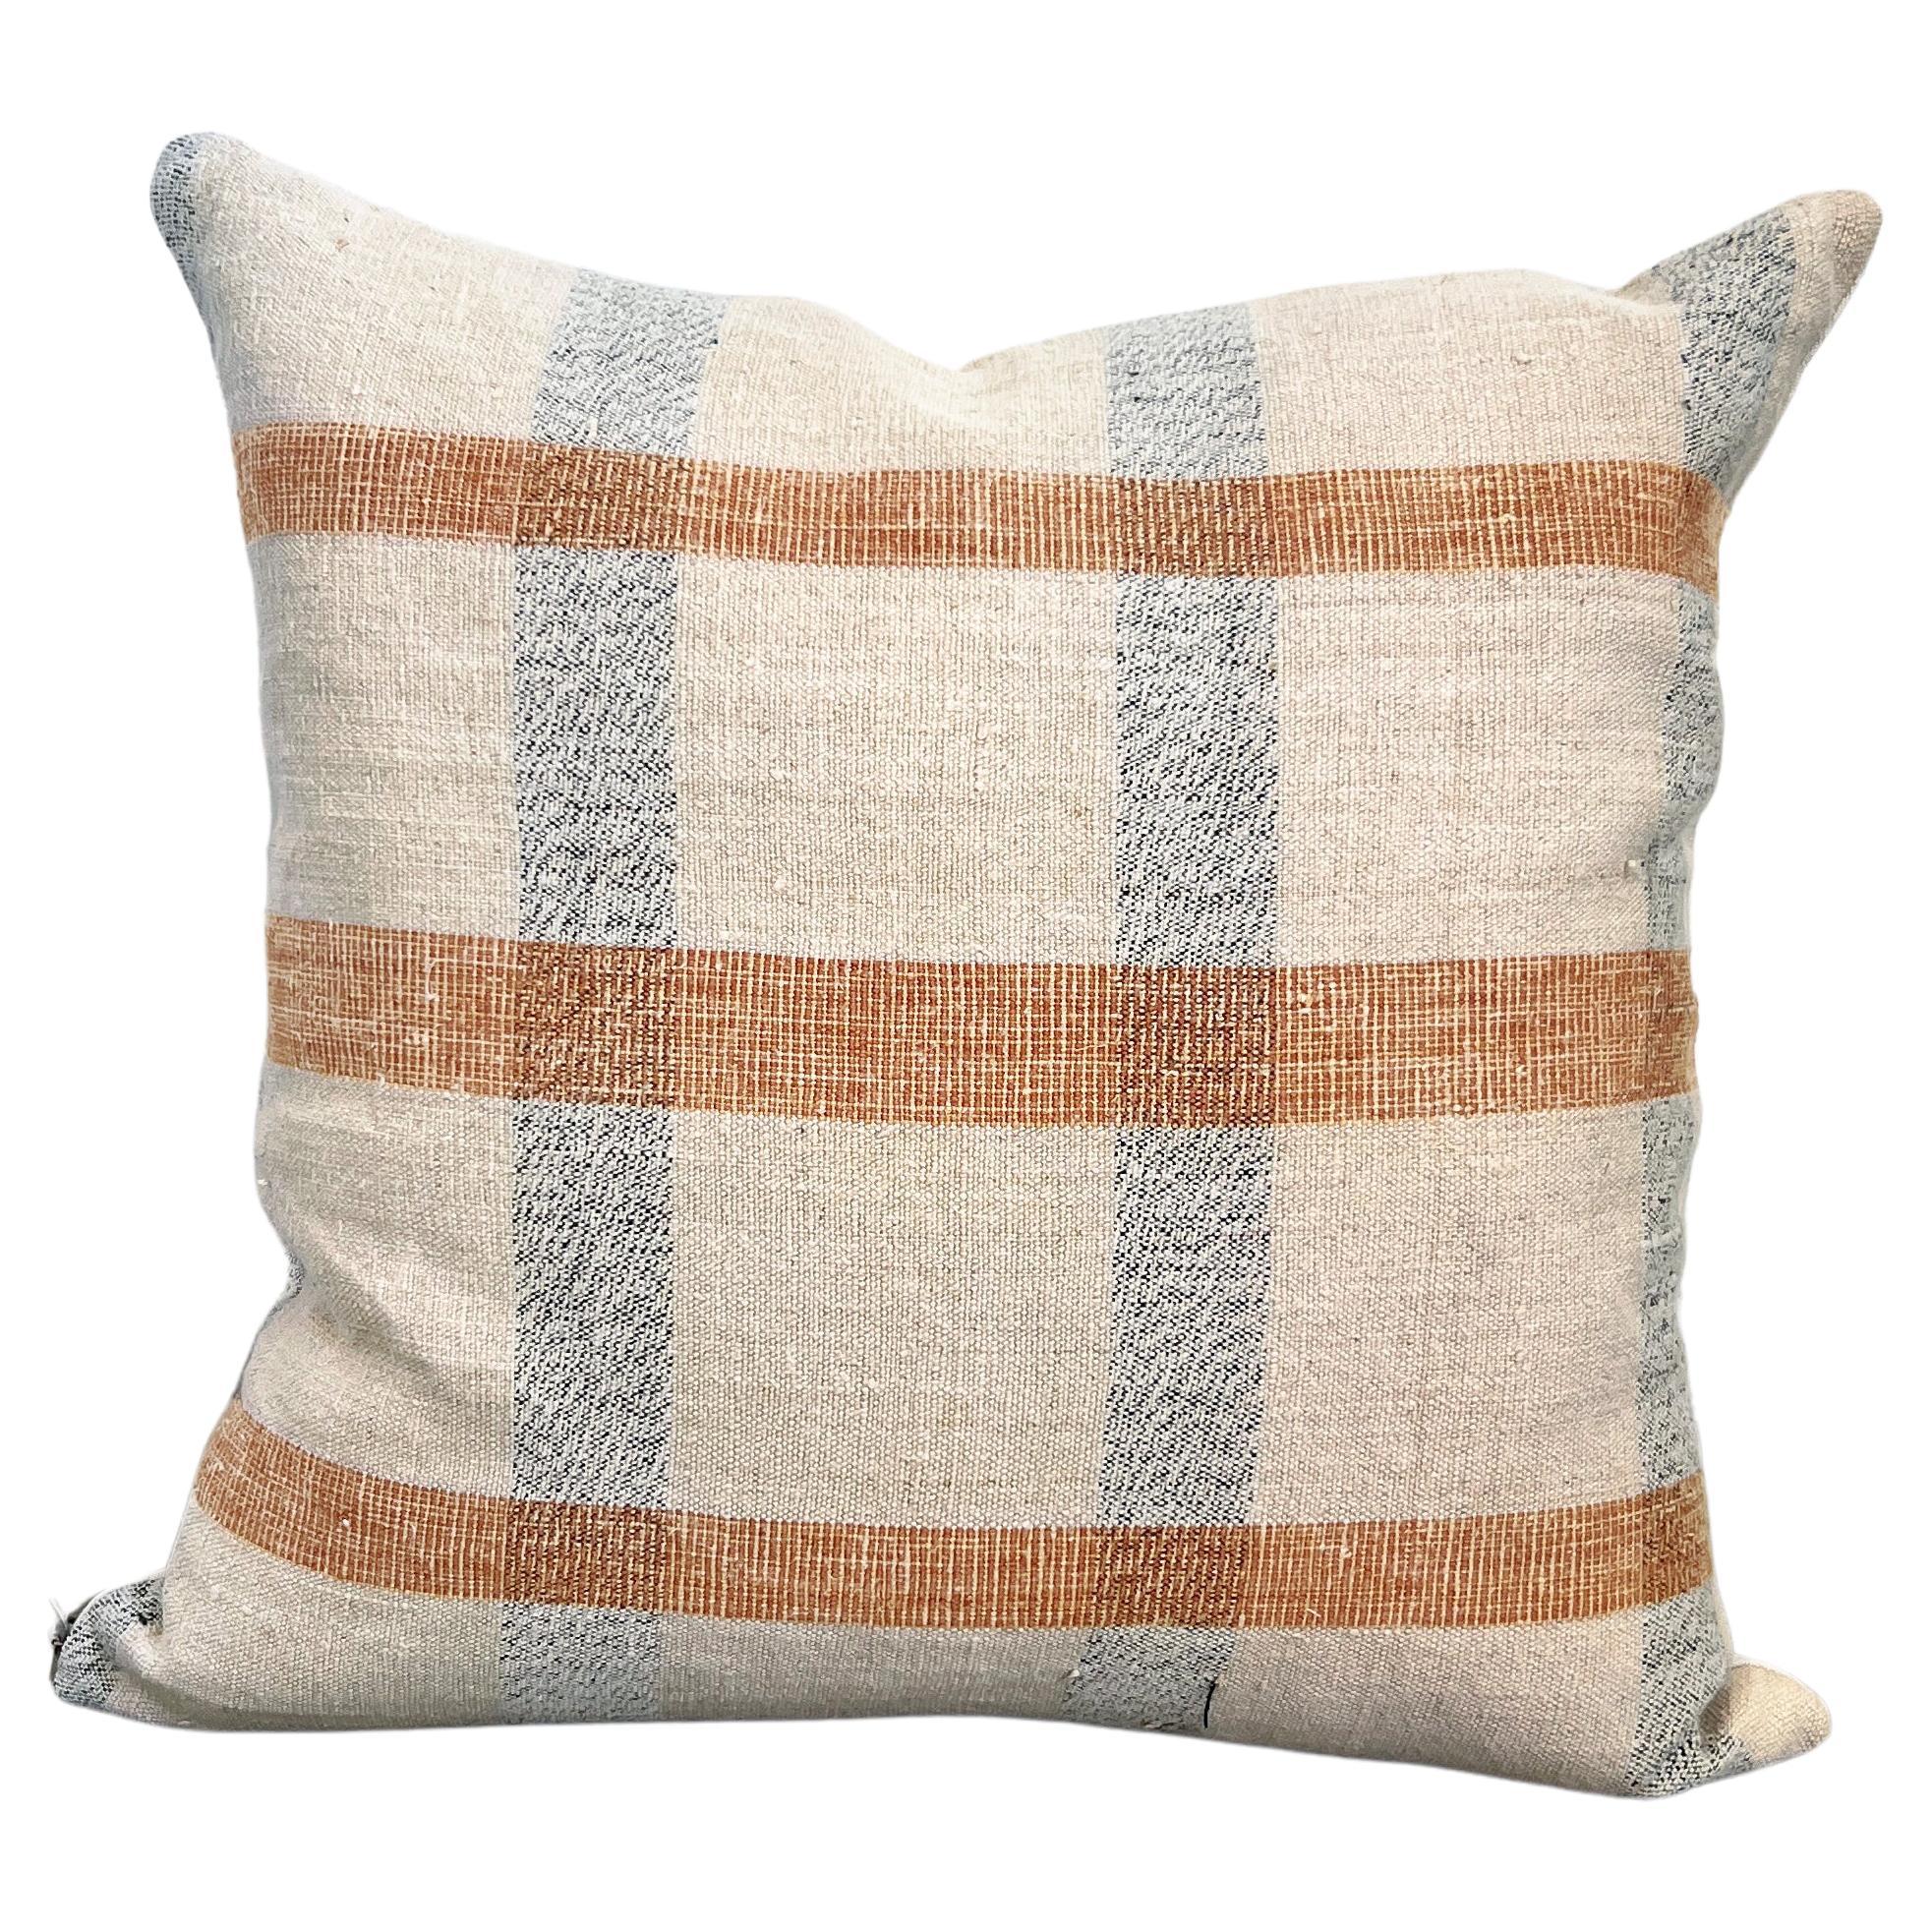 Matilde Terracotta Checkered Square Throw Pillow made from Vintage Linen